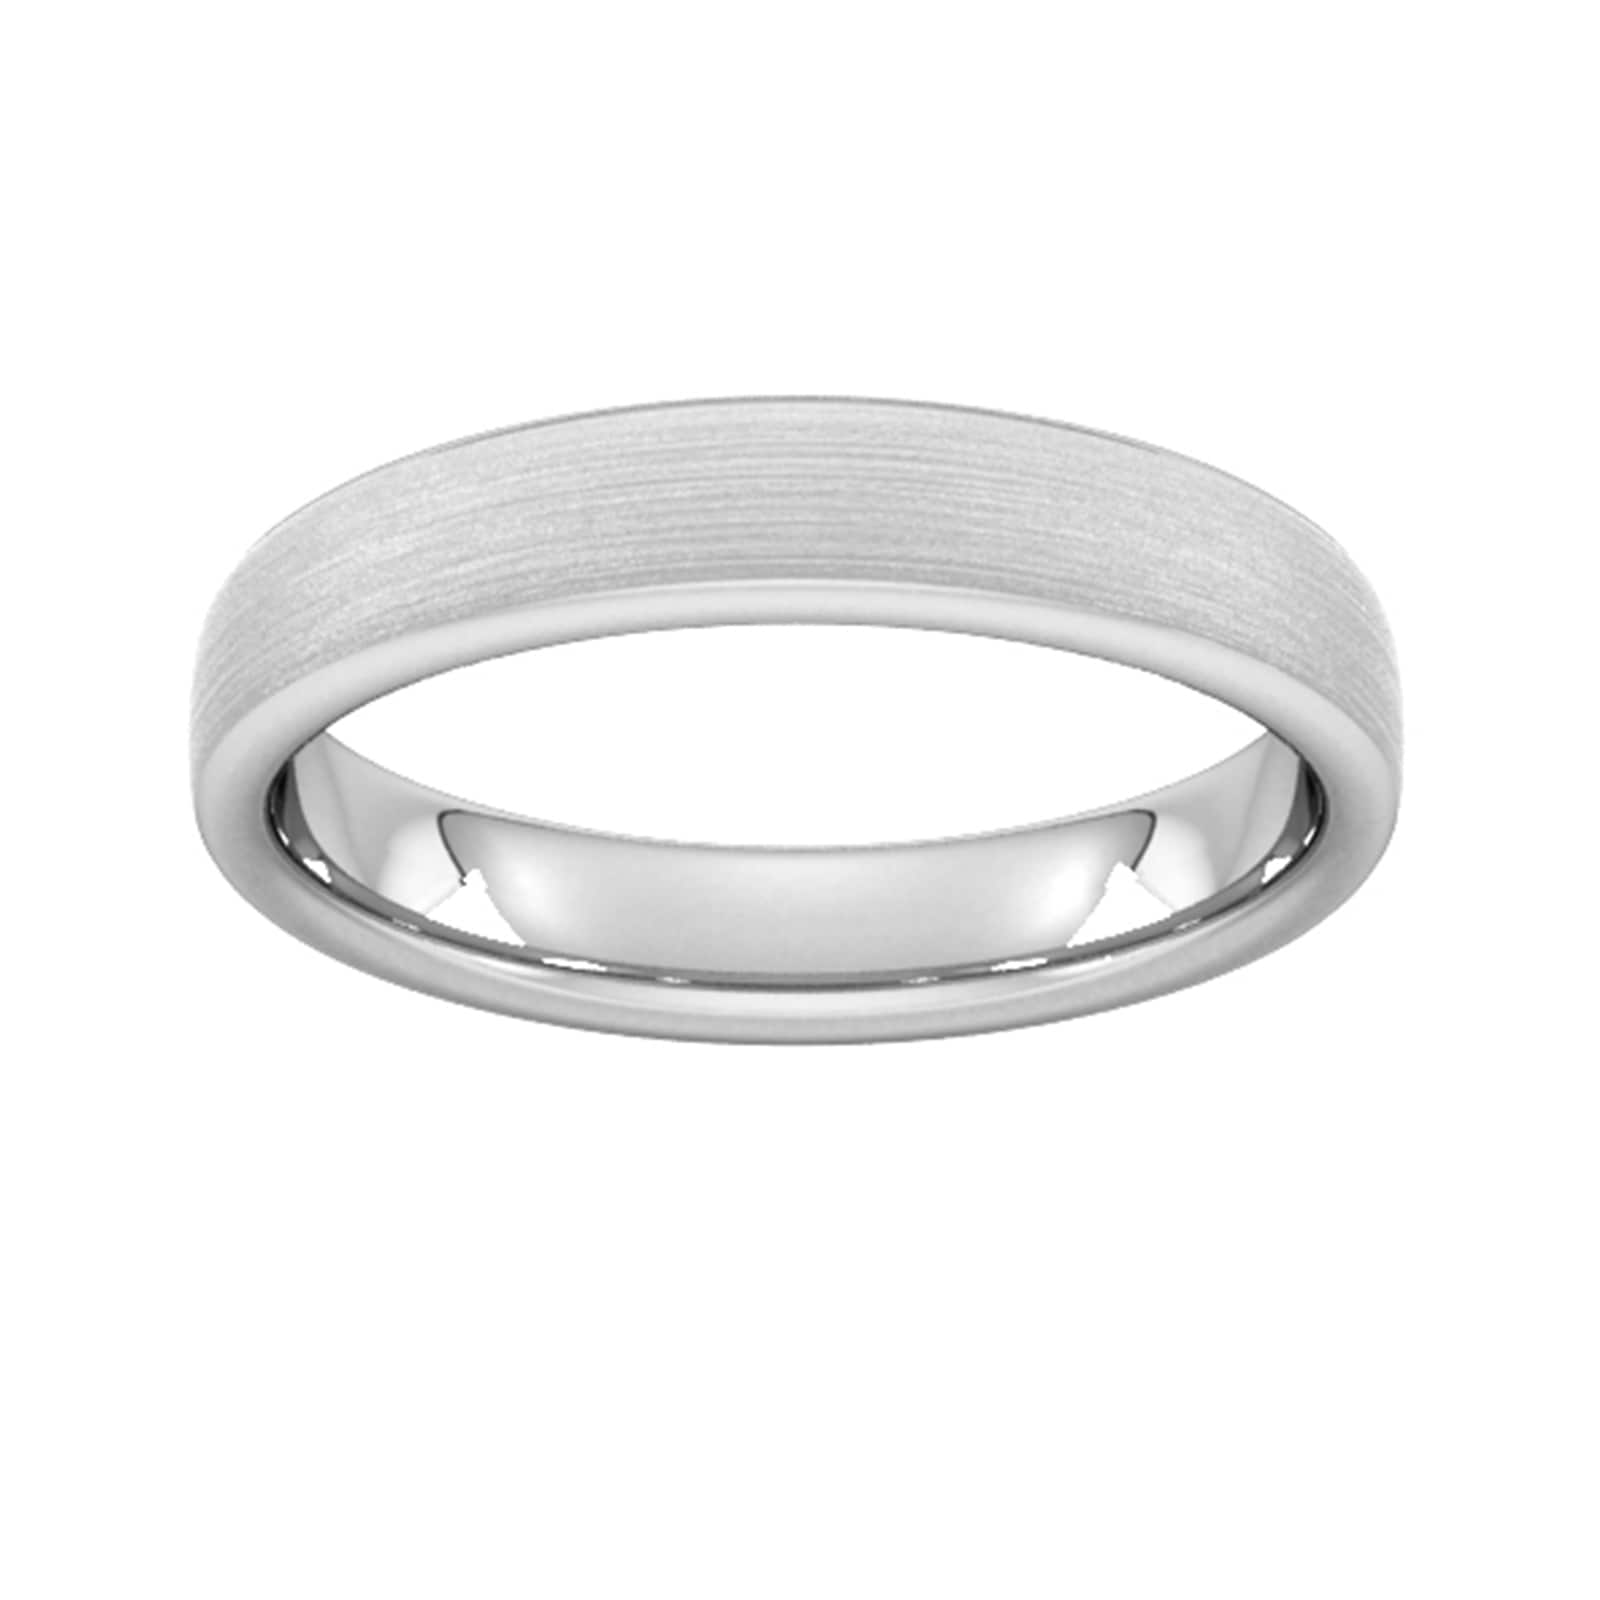 4mm Traditional Court Standard Matt Finished Wedding Ring In 18 Carat White Gold - Ring Size L